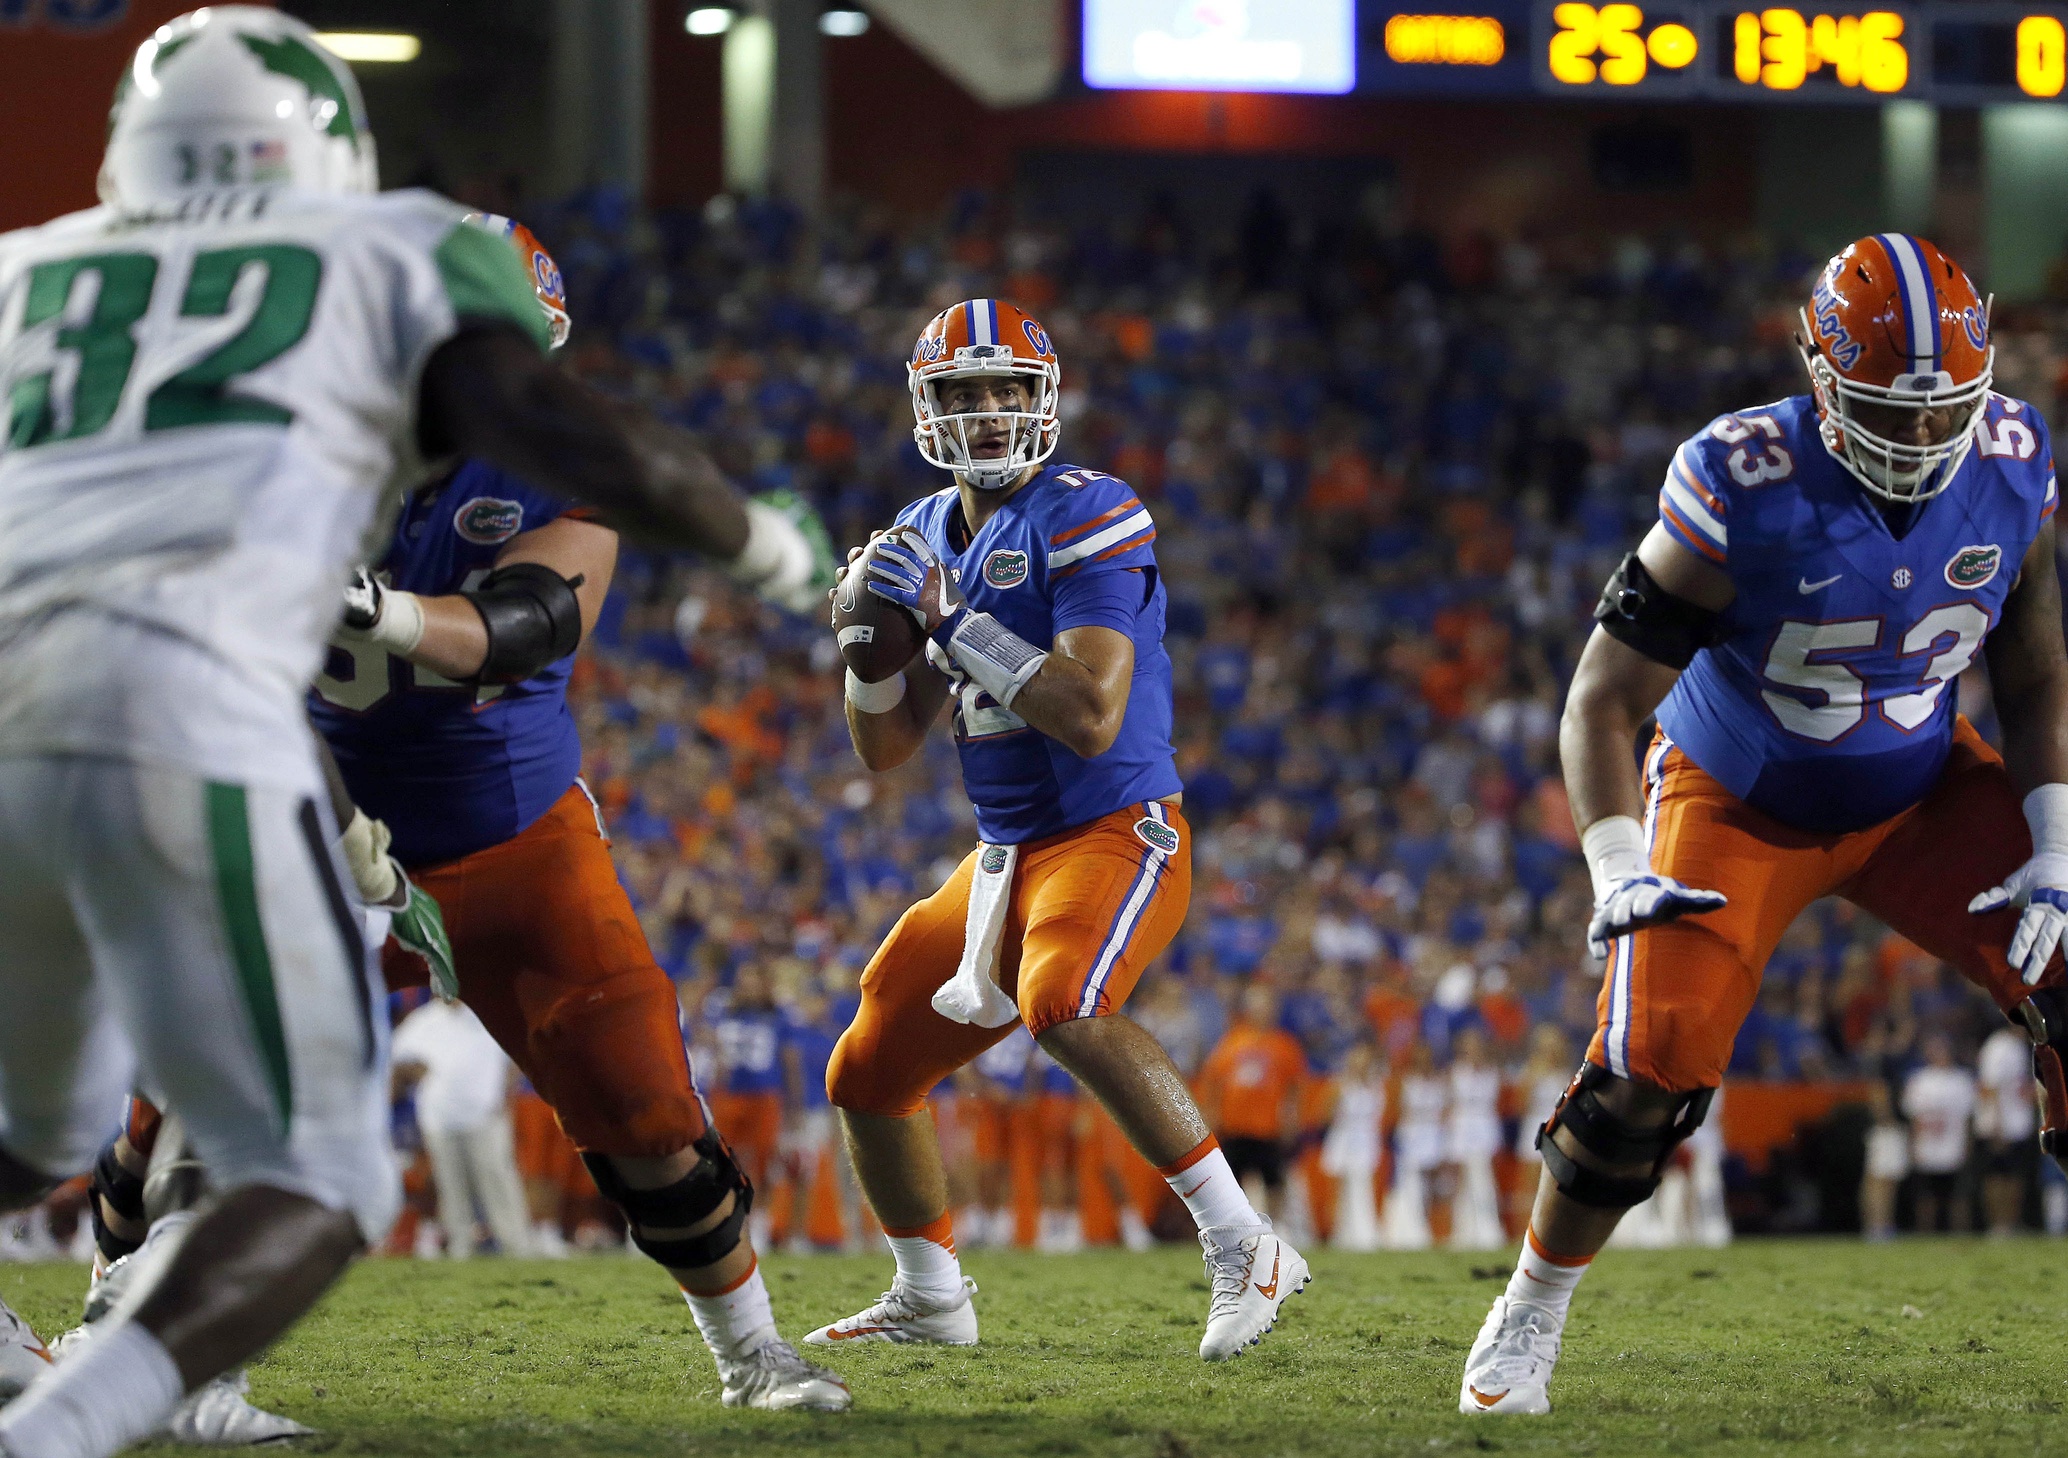 Sep 17, 2016; Gainesville, FL, USA; Florida Gators quarterback Austin Appleby (12) prepares to throw the ball against the North Texas Mean Green during the second half at Ben Hill Griffin Stadium. Florida Gators defeated the North Texas Mean Green 32-0. Mandatory Credit: Kim Klement-USA TODAY Sports